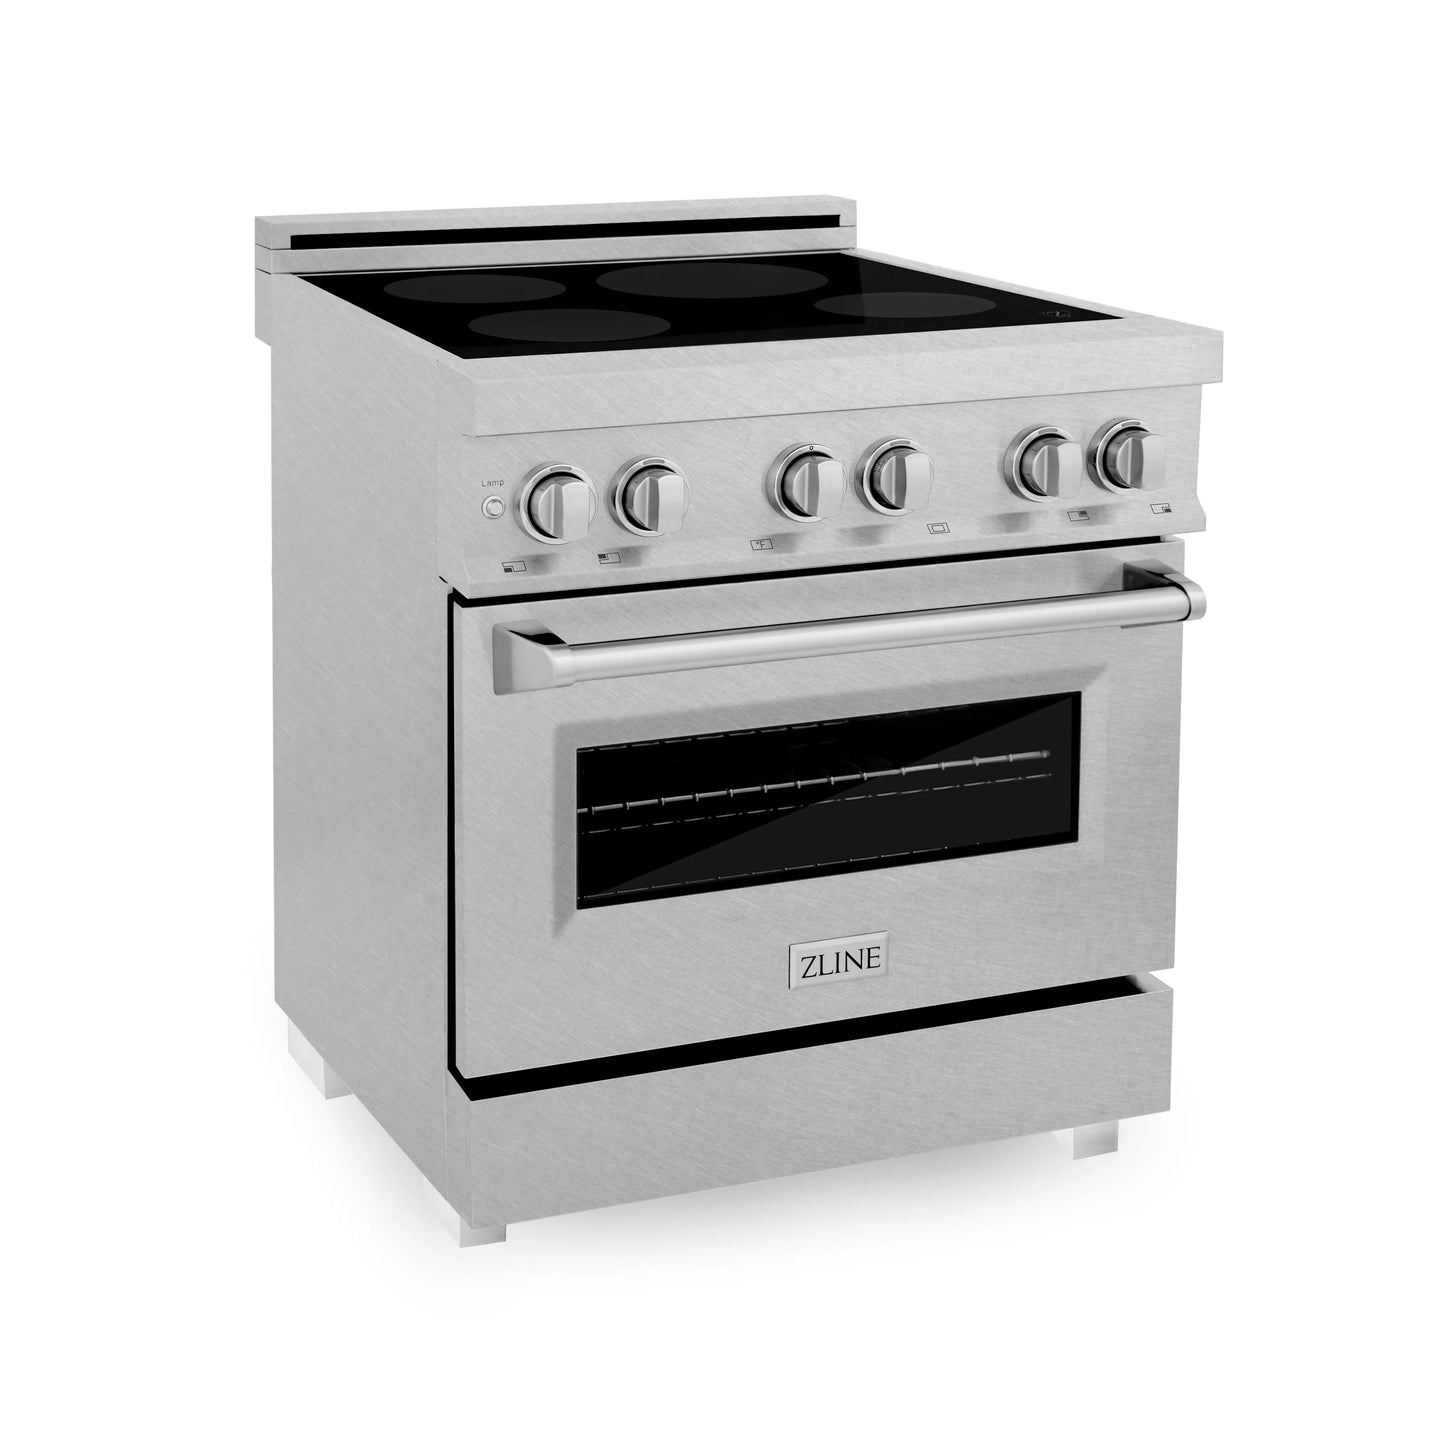 ZLINE 30 in. Induction Range in Fingerprint Resistant DuraSnow Stainless Steel with a 4 Element Stove and Electric Oven (RAINDS-SN-30)